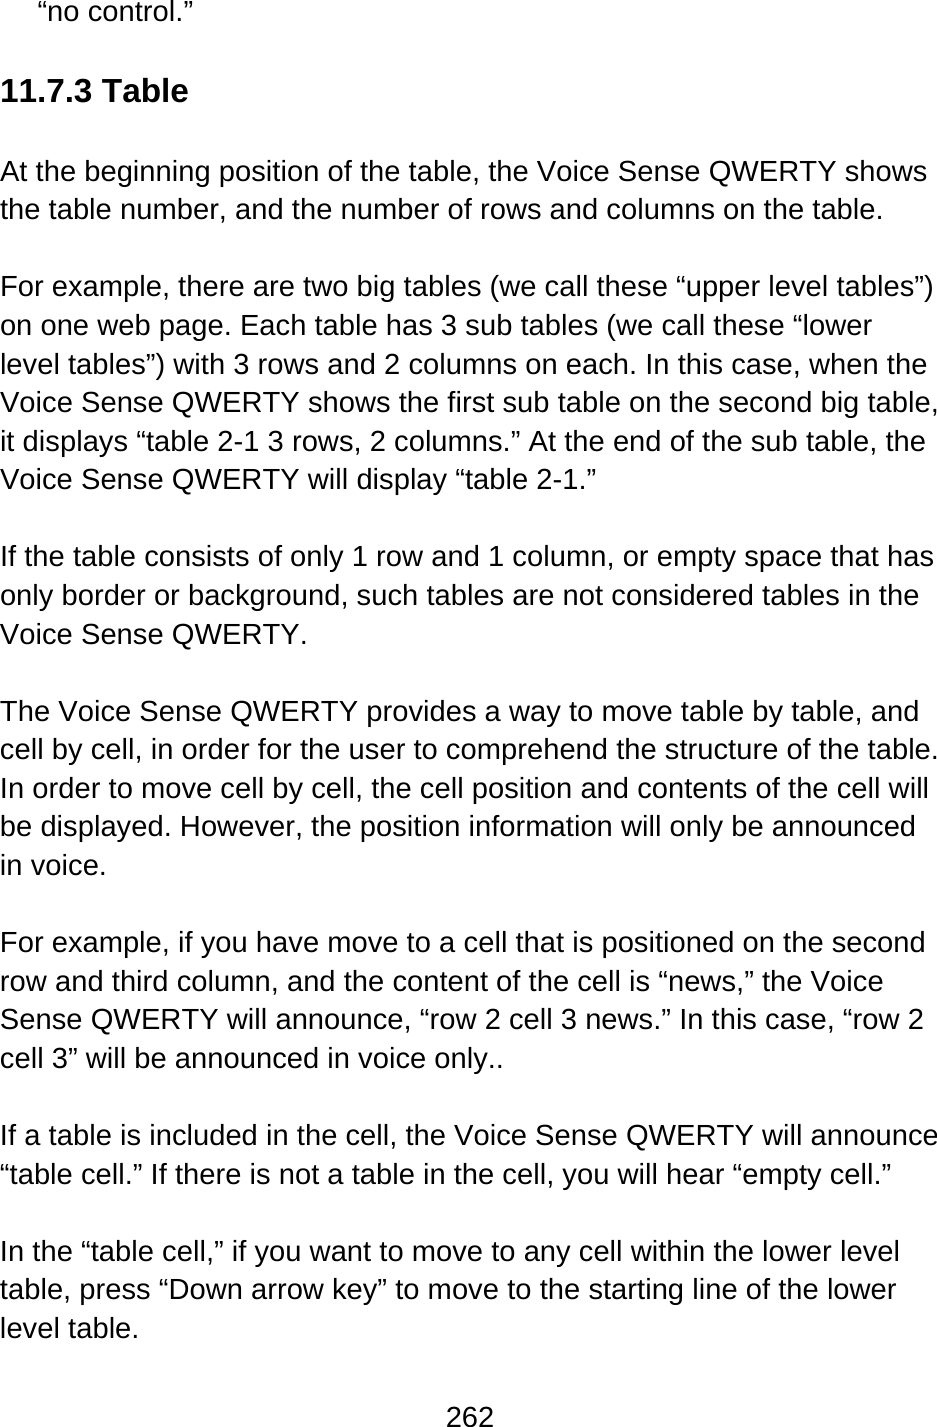 262  “no control.”  11.7.3 Table  At the beginning position of the table, the Voice Sense QWERTY shows the table number, and the number of rows and columns on the table.  For example, there are two big tables (we call these “upper level tables”) on one web page. Each table has 3 sub tables (we call these “lower level tables”) with 3 rows and 2 columns on each. In this case, when the Voice Sense QWERTY shows the first sub table on the second big table, it displays “table 2-1 3 rows, 2 columns.” At the end of the sub table, the Voice Sense QWERTY will display “table 2-1.”  If the table consists of only 1 row and 1 column, or empty space that has only border or background, such tables are not considered tables in the Voice Sense QWERTY.  The Voice Sense QWERTY provides a way to move table by table, and cell by cell, in order for the user to comprehend the structure of the table.   In order to move cell by cell, the cell position and contents of the cell will be displayed. However, the position information will only be announced in voice.  For example, if you have move to a cell that is positioned on the second row and third column, and the content of the cell is “news,” the Voice Sense QWERTY will announce, “row 2 cell 3 news.” In this case, “row 2 cell 3” will be announced in voice only..  If a table is included in the cell, the Voice Sense QWERTY will announce “table cell.” If there is not a table in the cell, you will hear “empty cell.”  In the “table cell,” if you want to move to any cell within the lower level table, press “Down arrow key” to move to the starting line of the lower level table.    